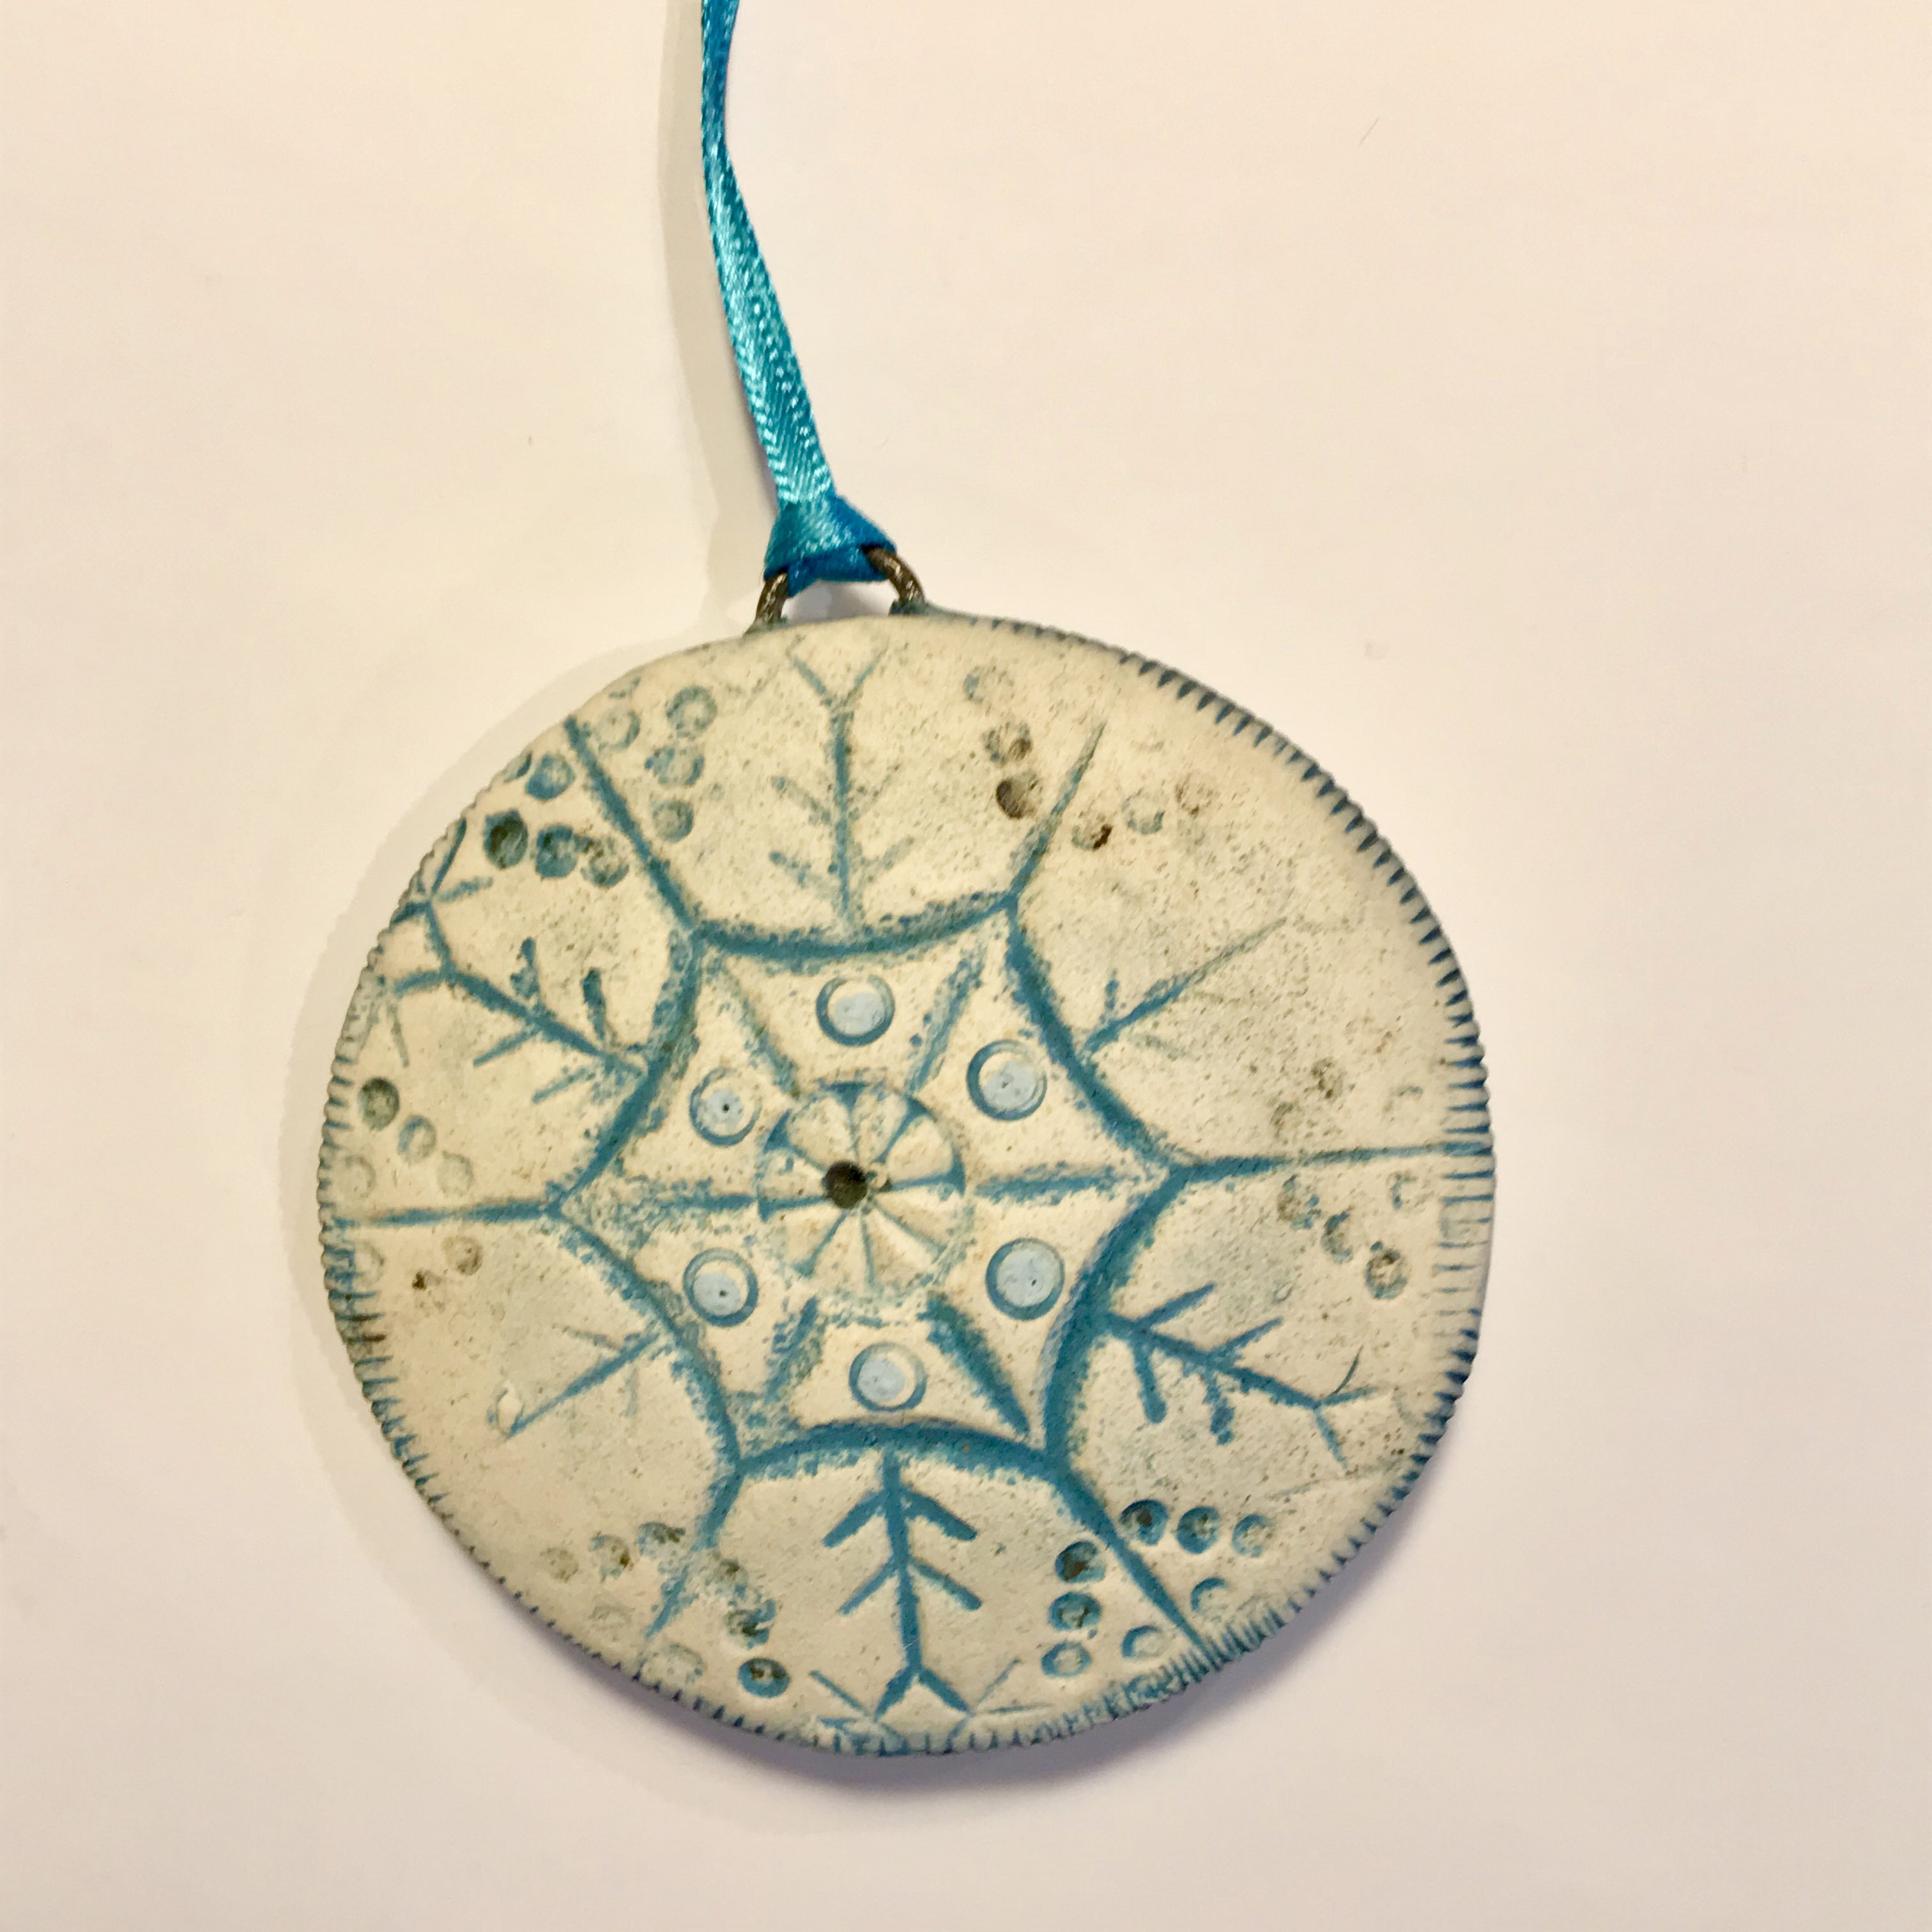 Ceramic Christmas Bauble on ribbon - Old Chapel Gallery